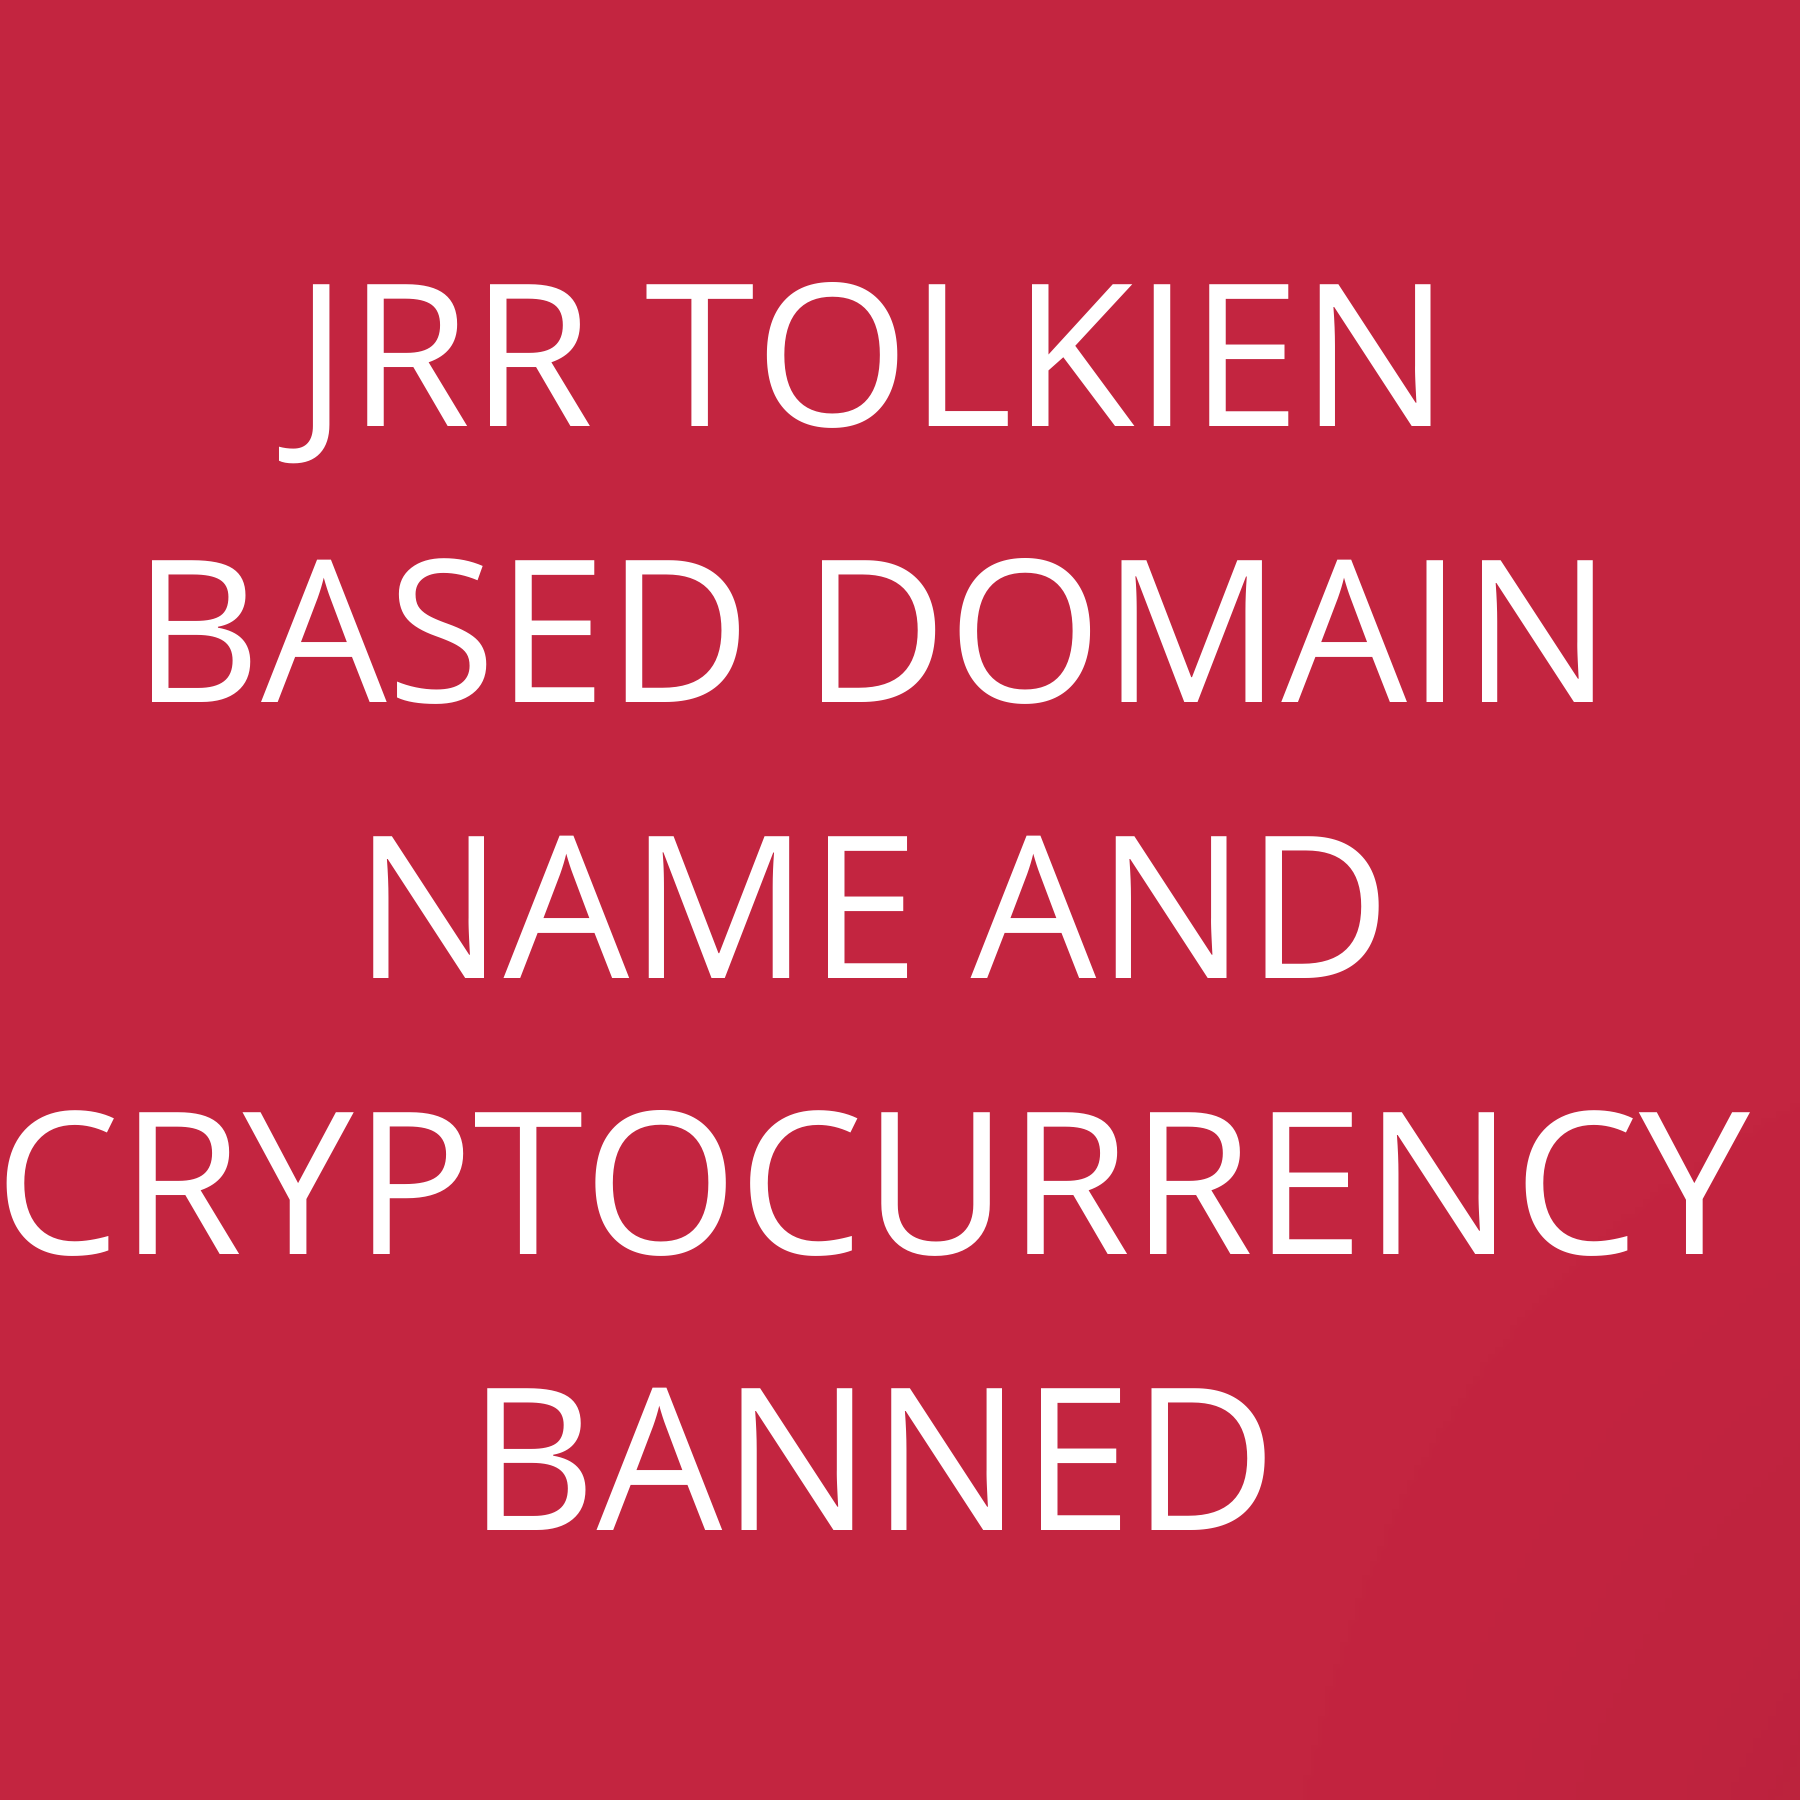 JRR Tolkien based Domain name and Cryptocurrency banned